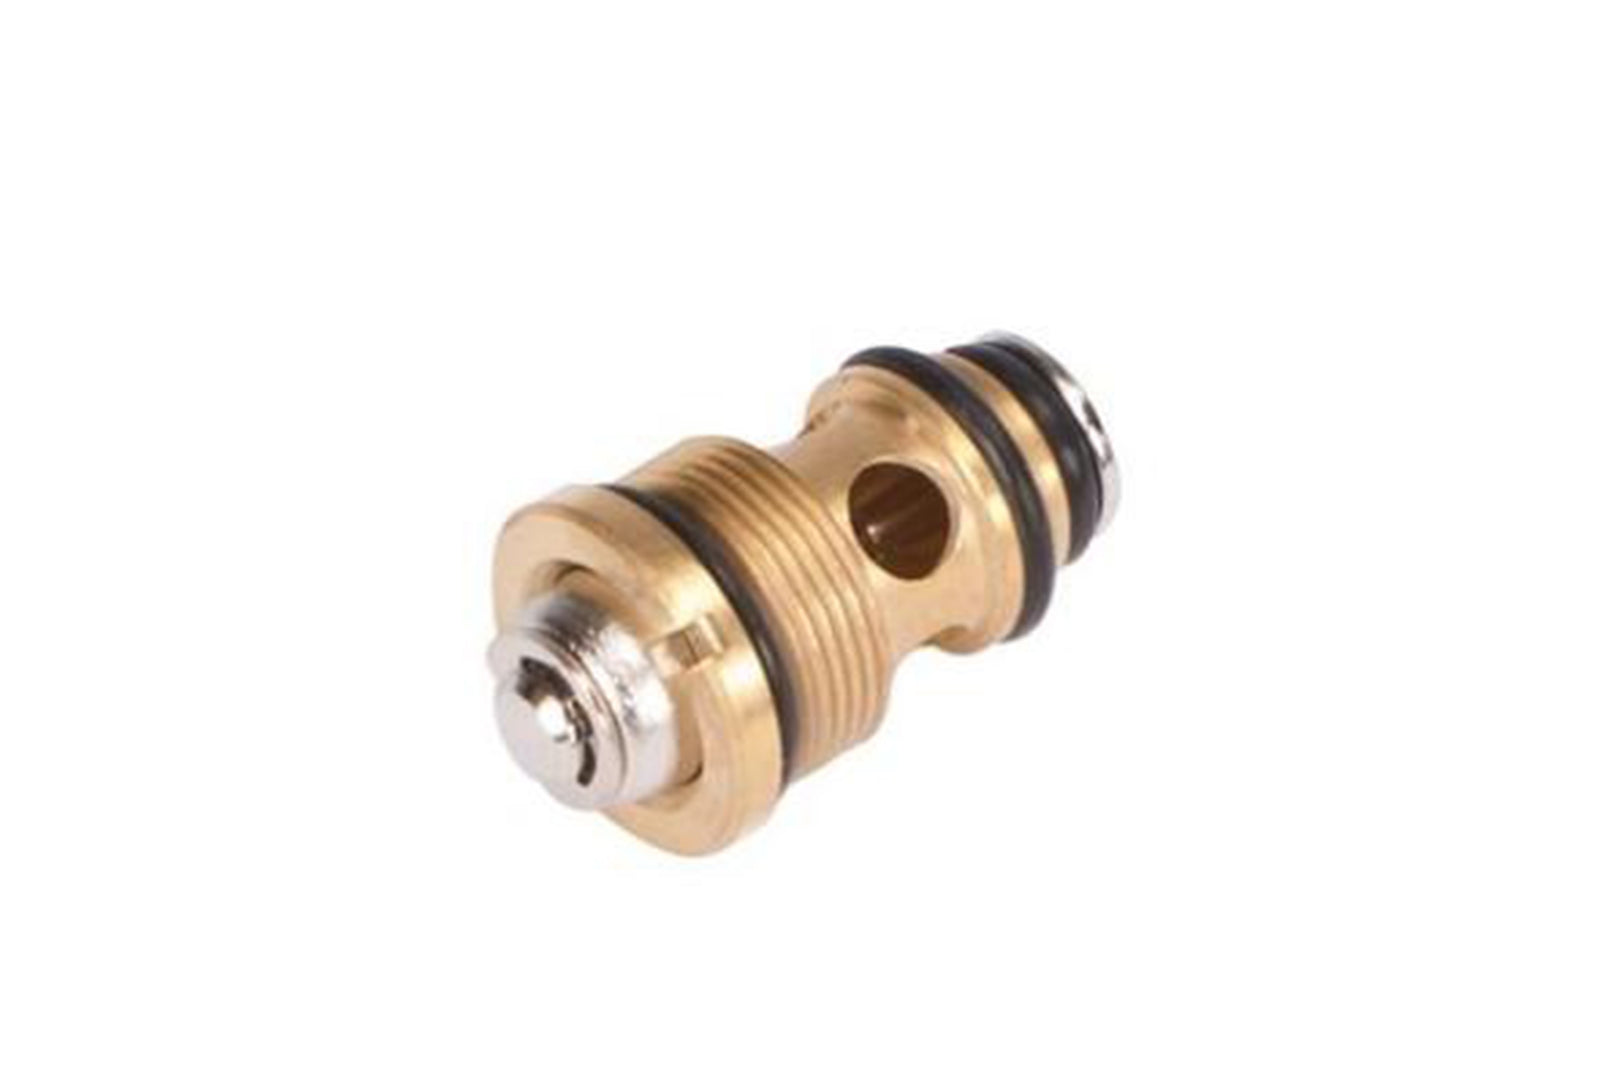 WE Reinforced Output Release Valve for Hi-Capa / 1911 Series Airsoft Gas Blowback